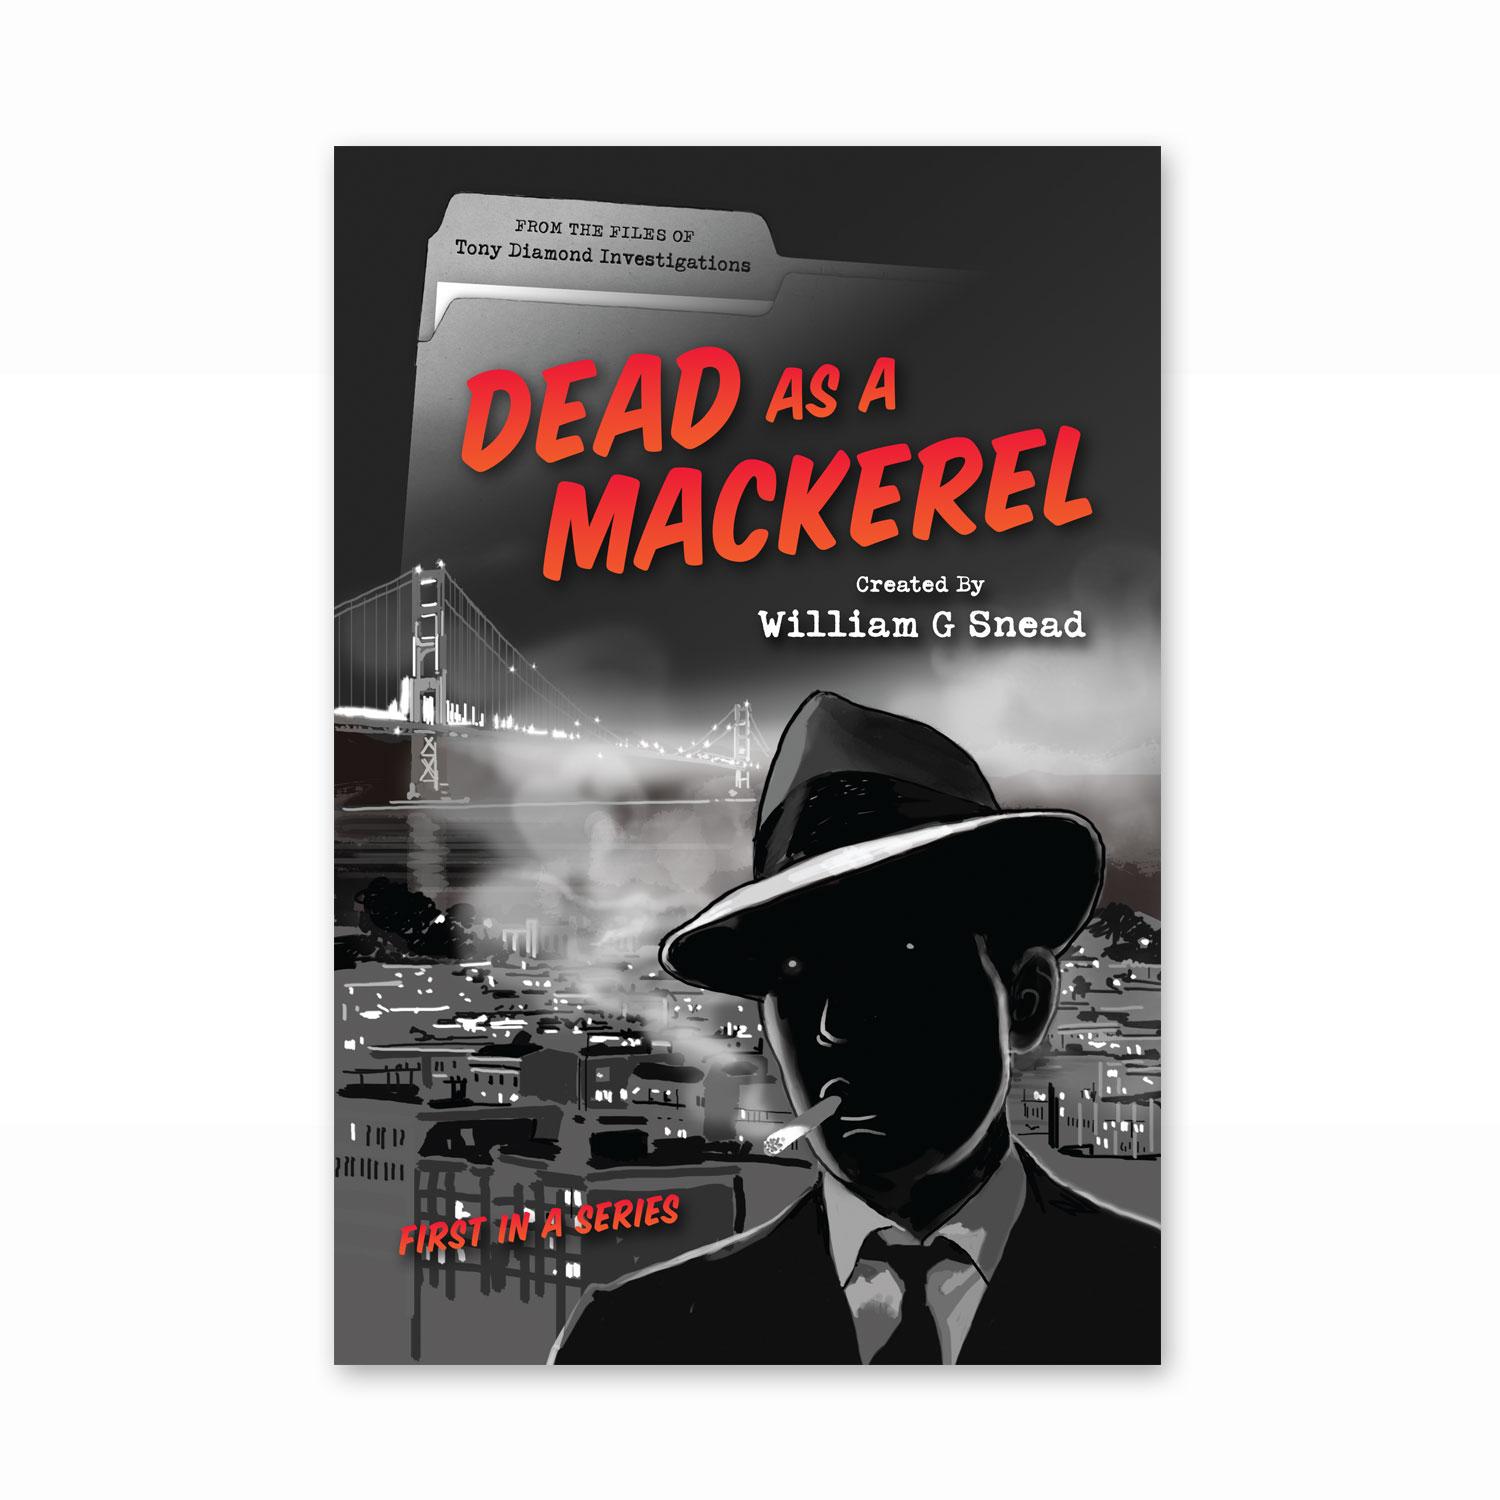 Film noir book cover: digital illustration created in Photoshop